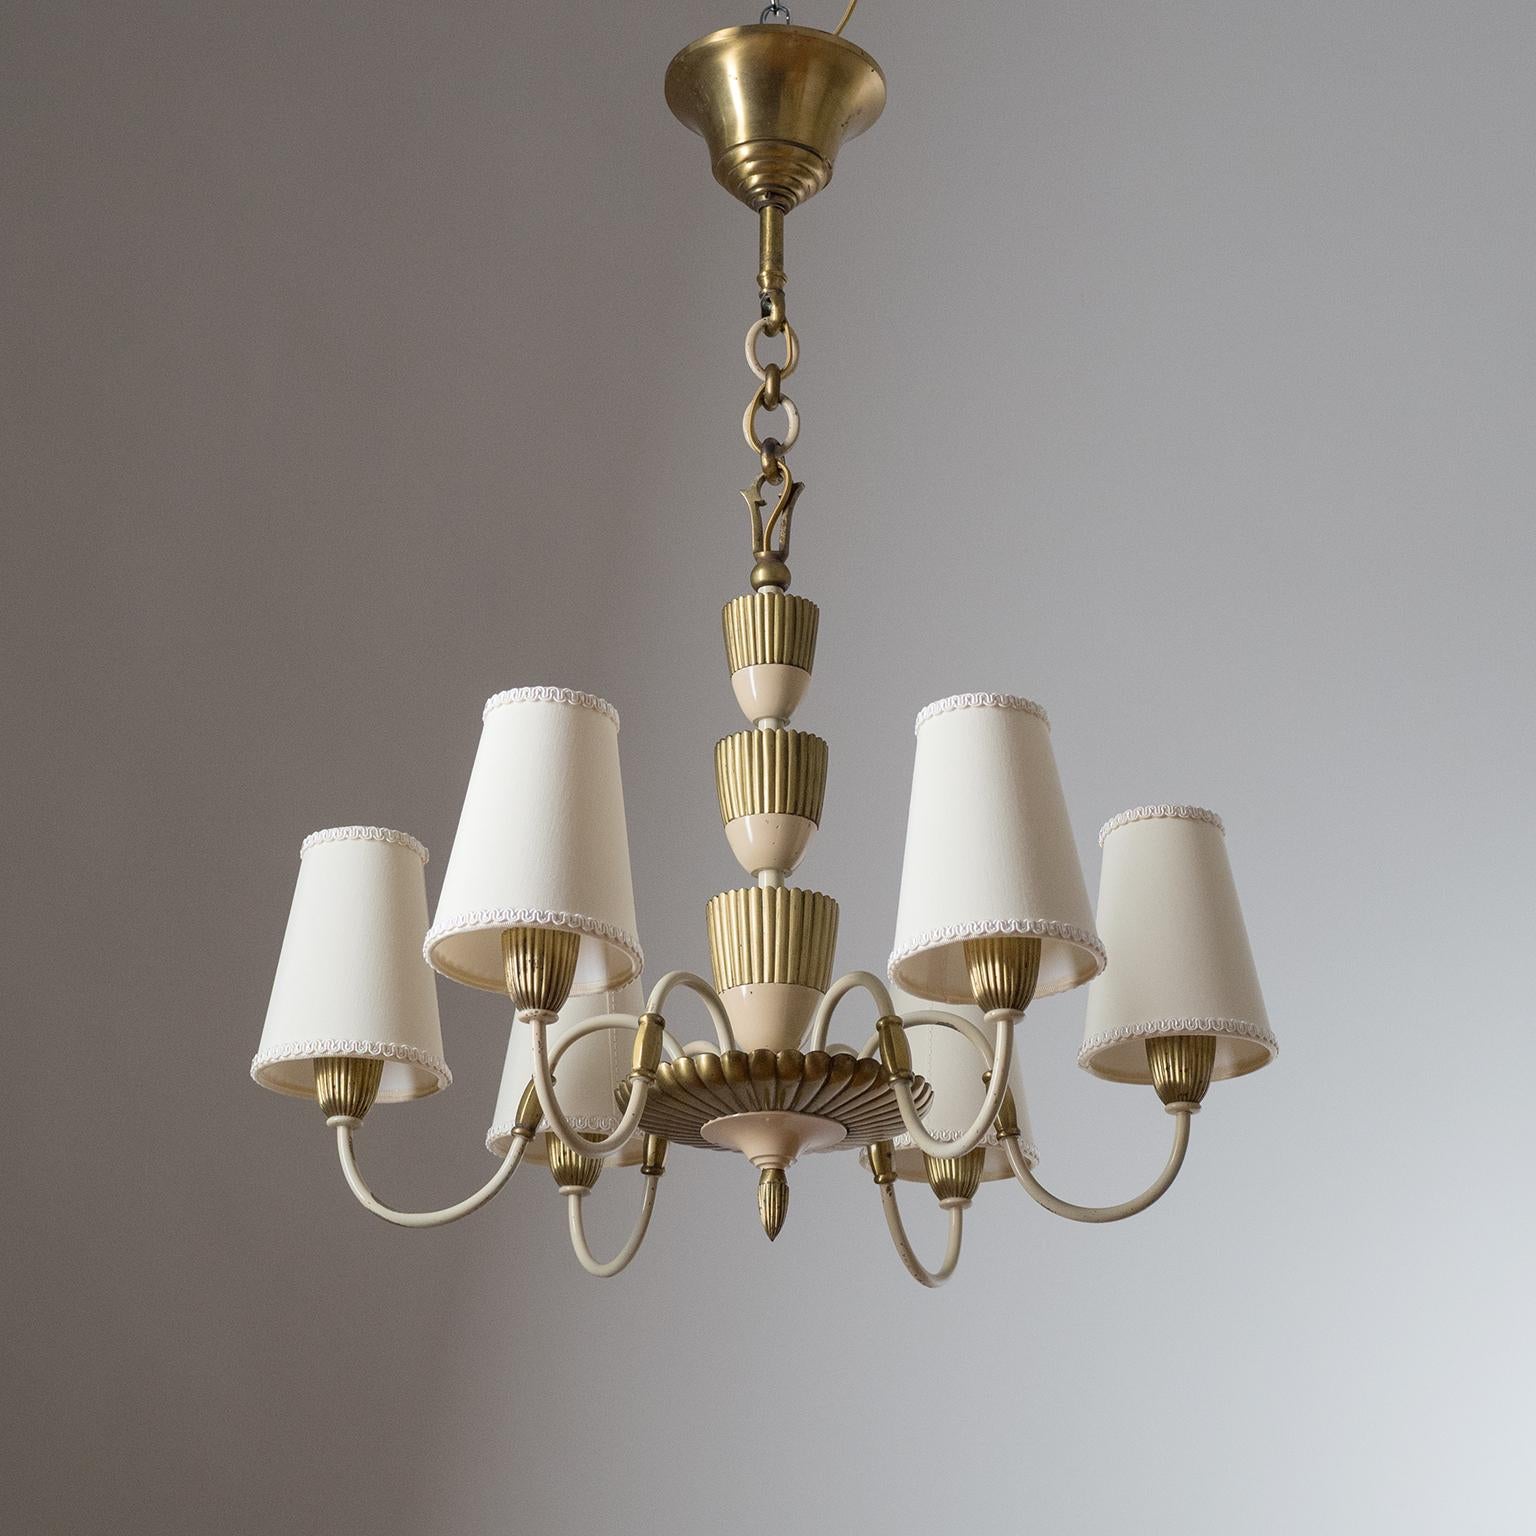 Rare French Art Deco chandelier from the 1930-1940s. All-brass construction, partially enameled in cream, with solid cast brass elements. Good original condition with some patina. Brass and ceramic E14 sockets with new wiring. Height without the